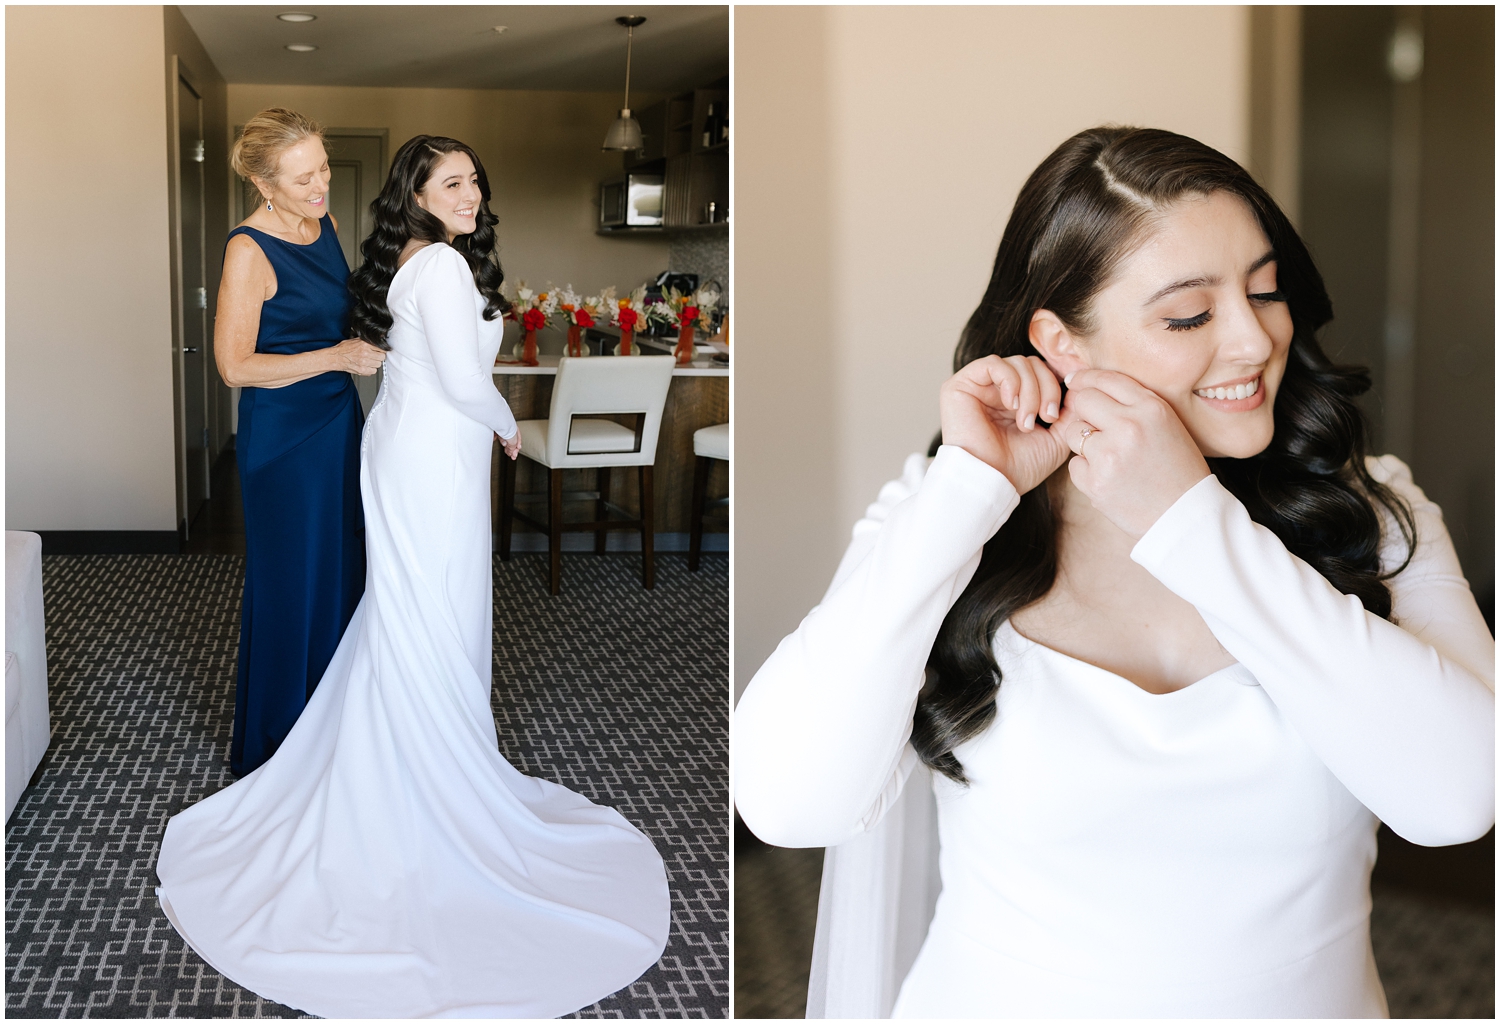 Bride and her mother get ready together on wedding day